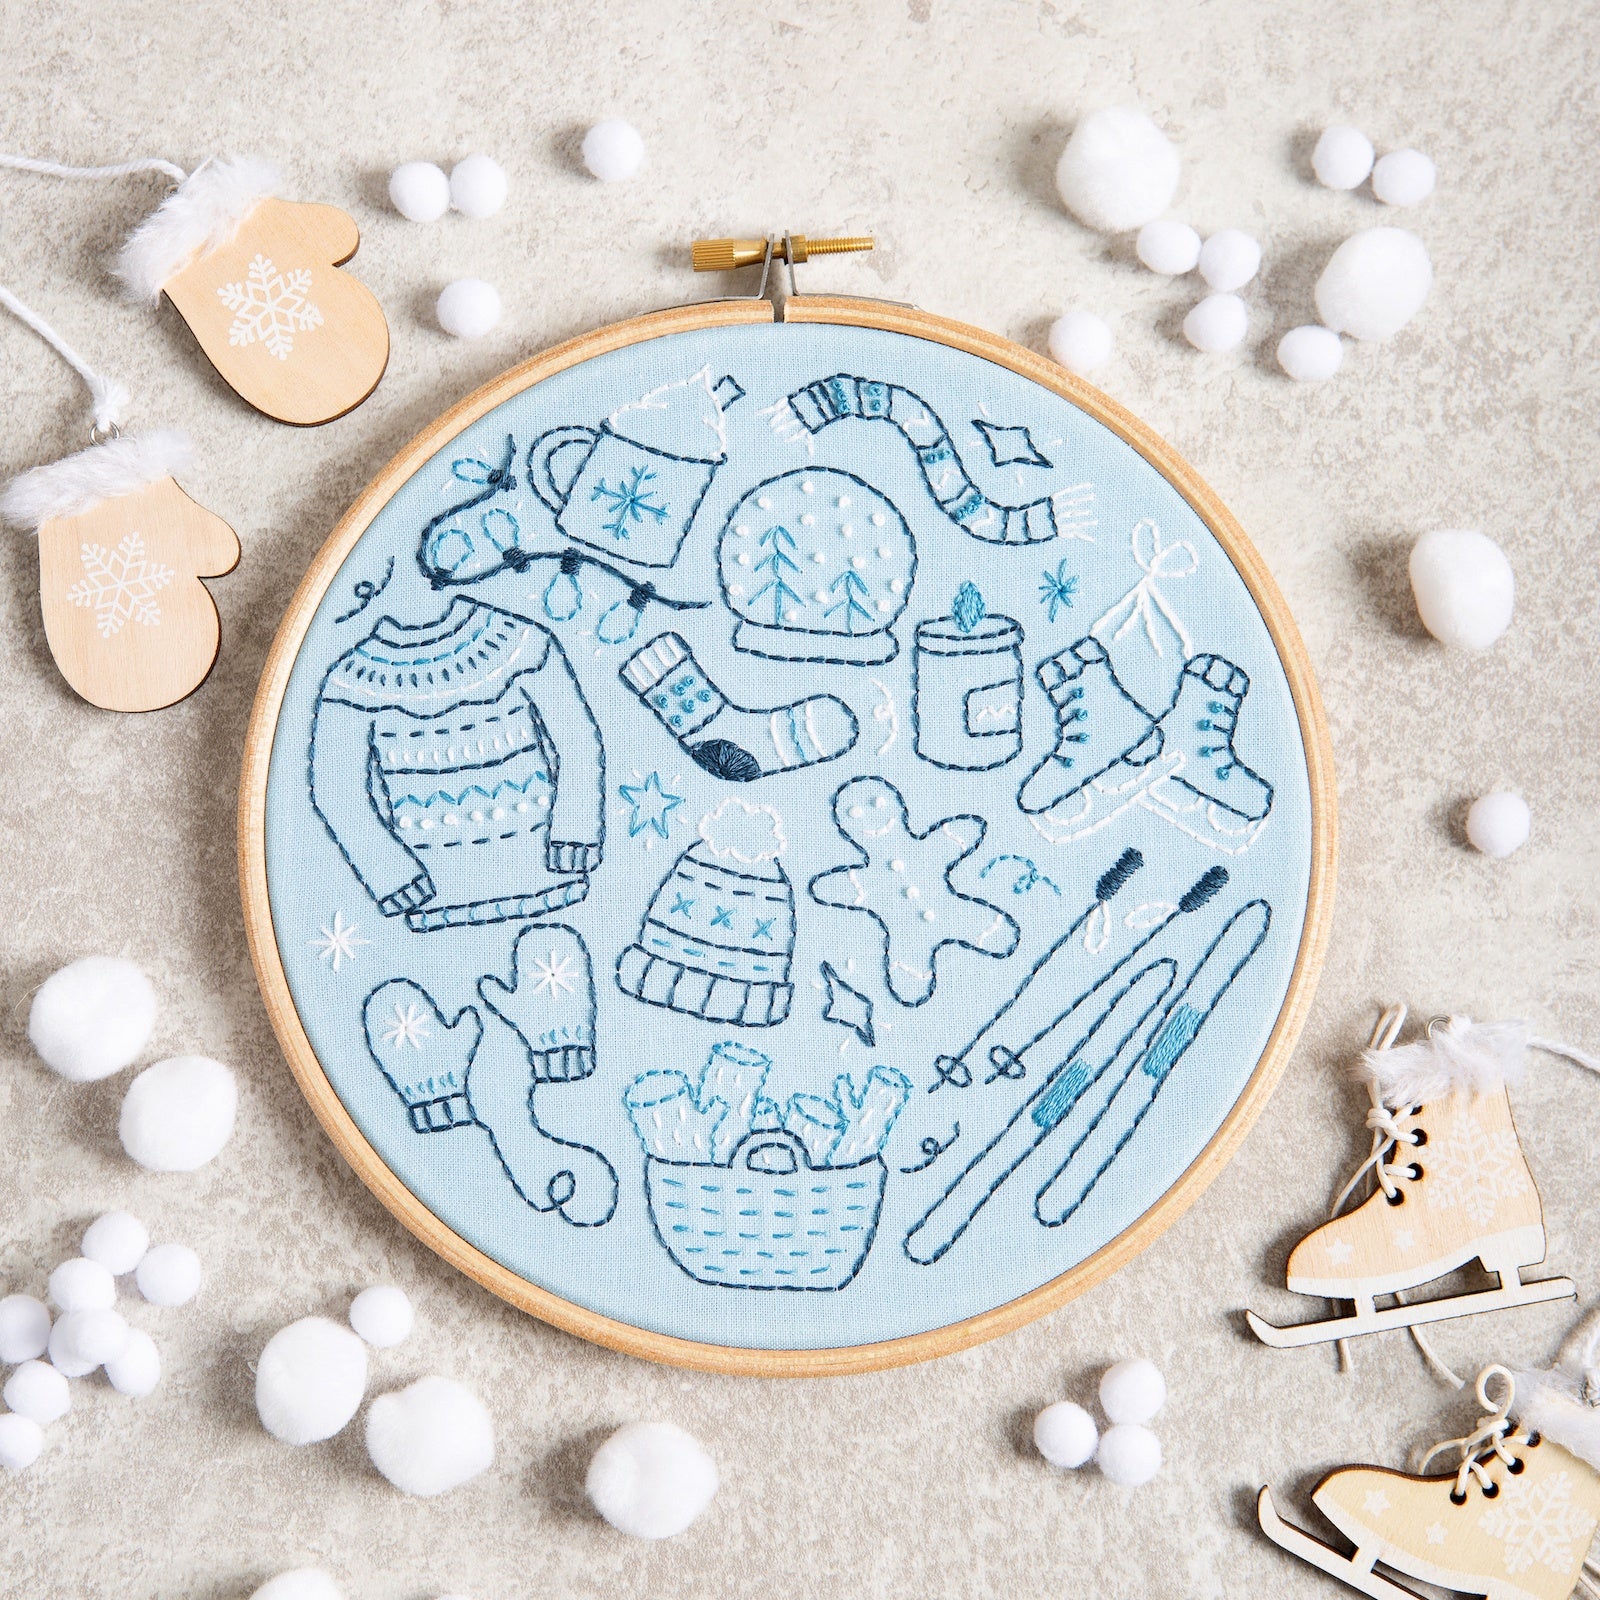 Doodles Embroidery Kits